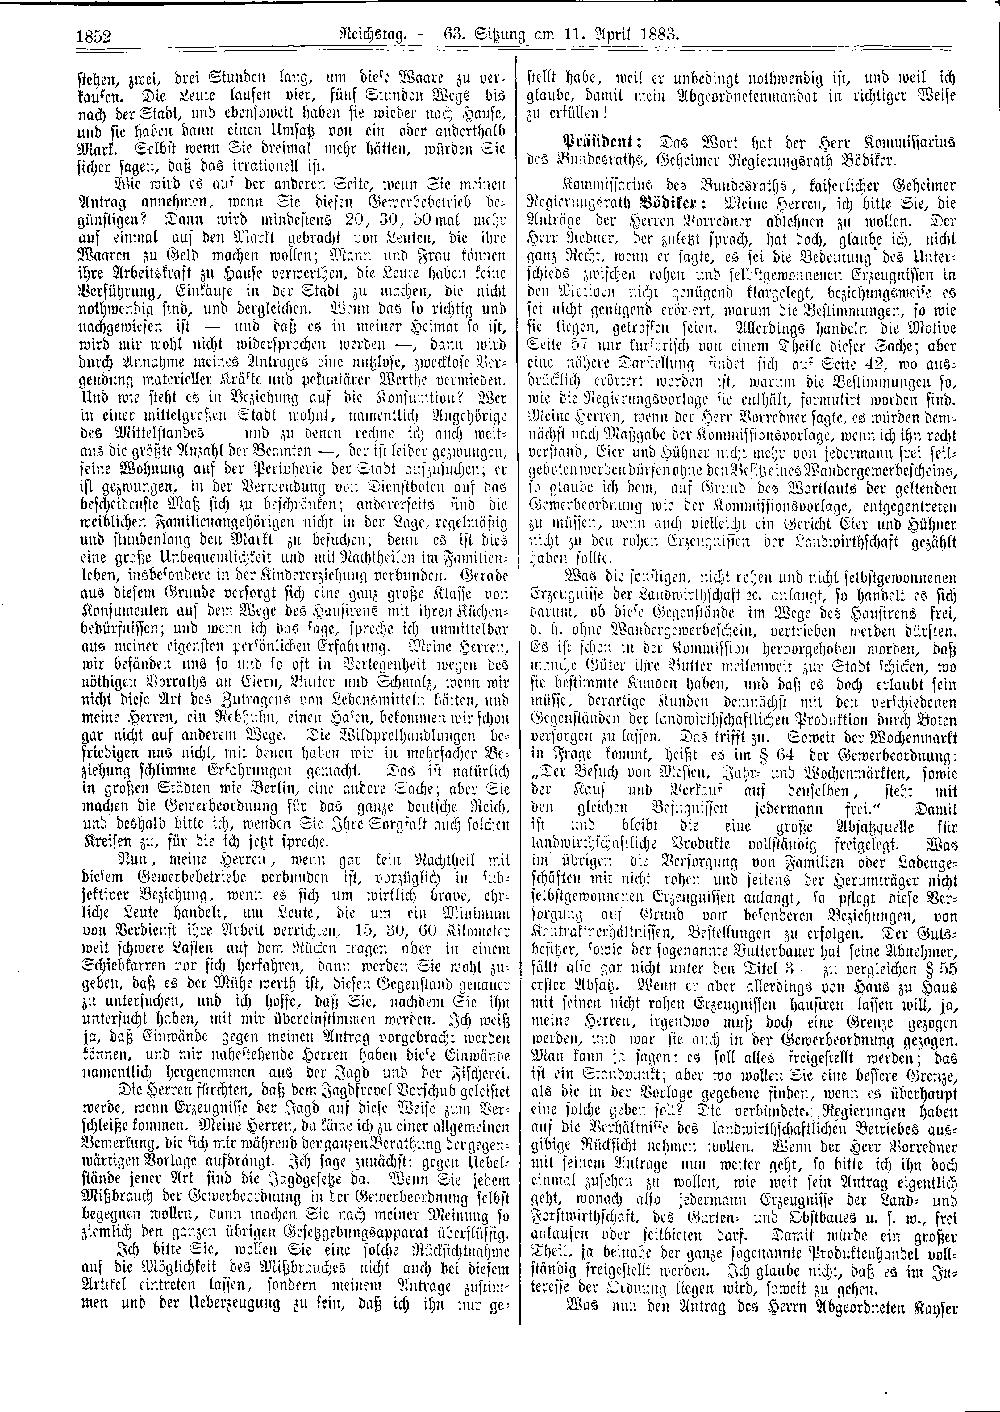 Scan of page 1852